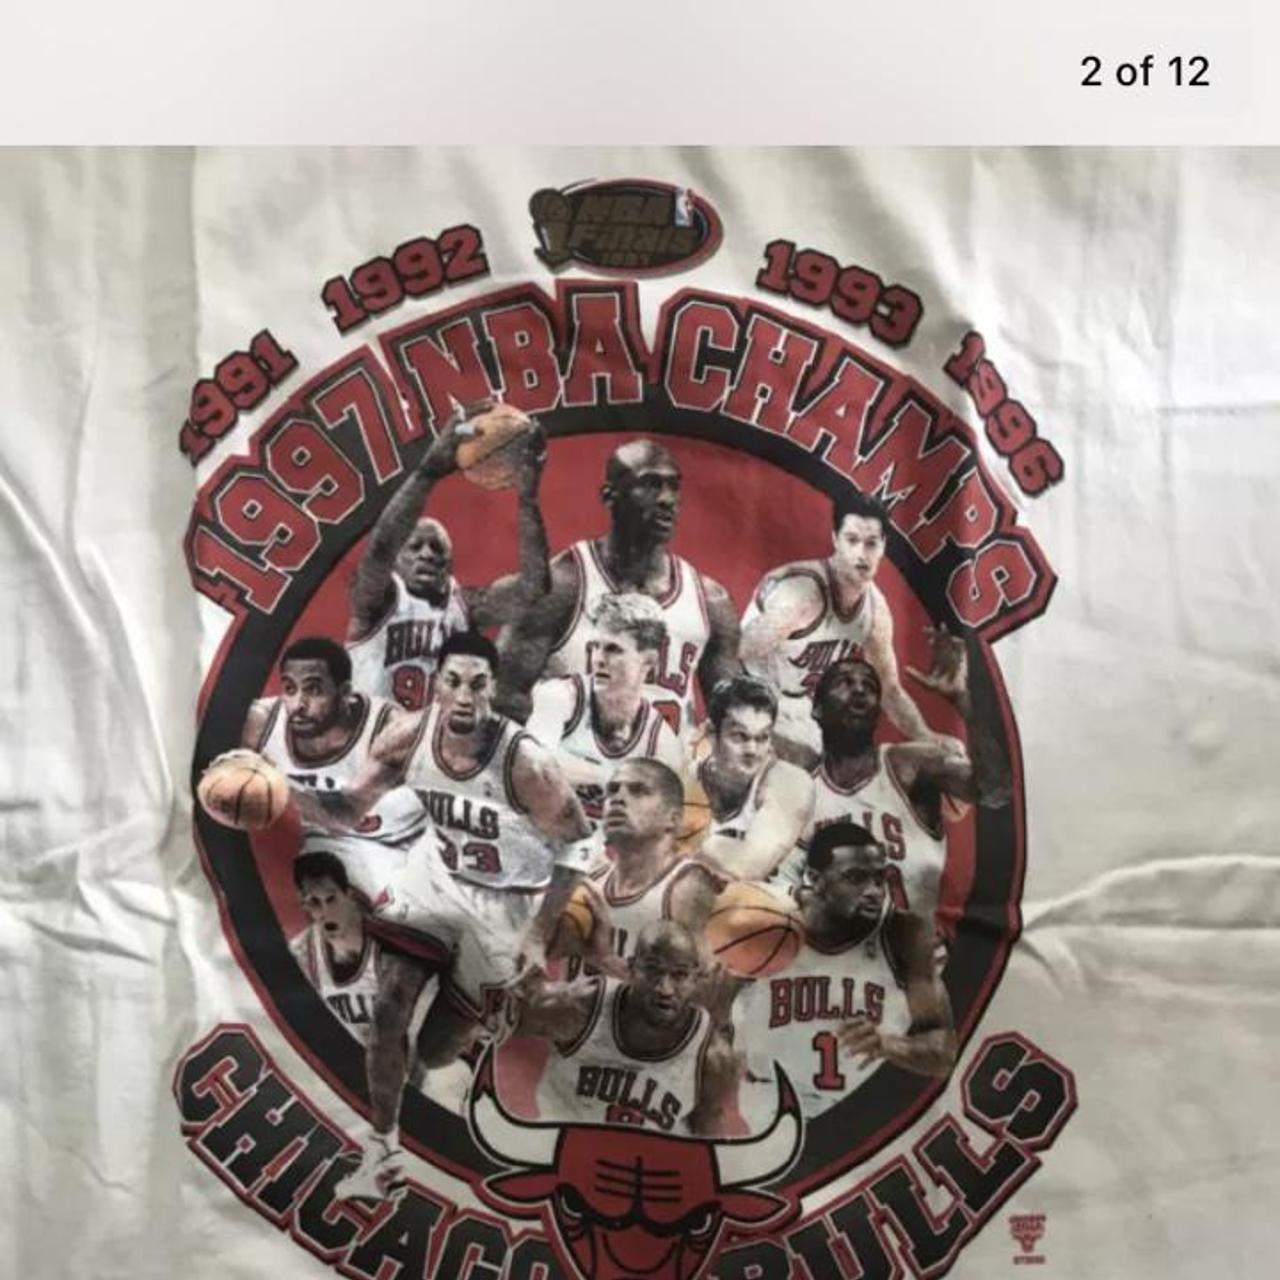 Chicago Bulls Jersey Tee Adult Small White - Depop